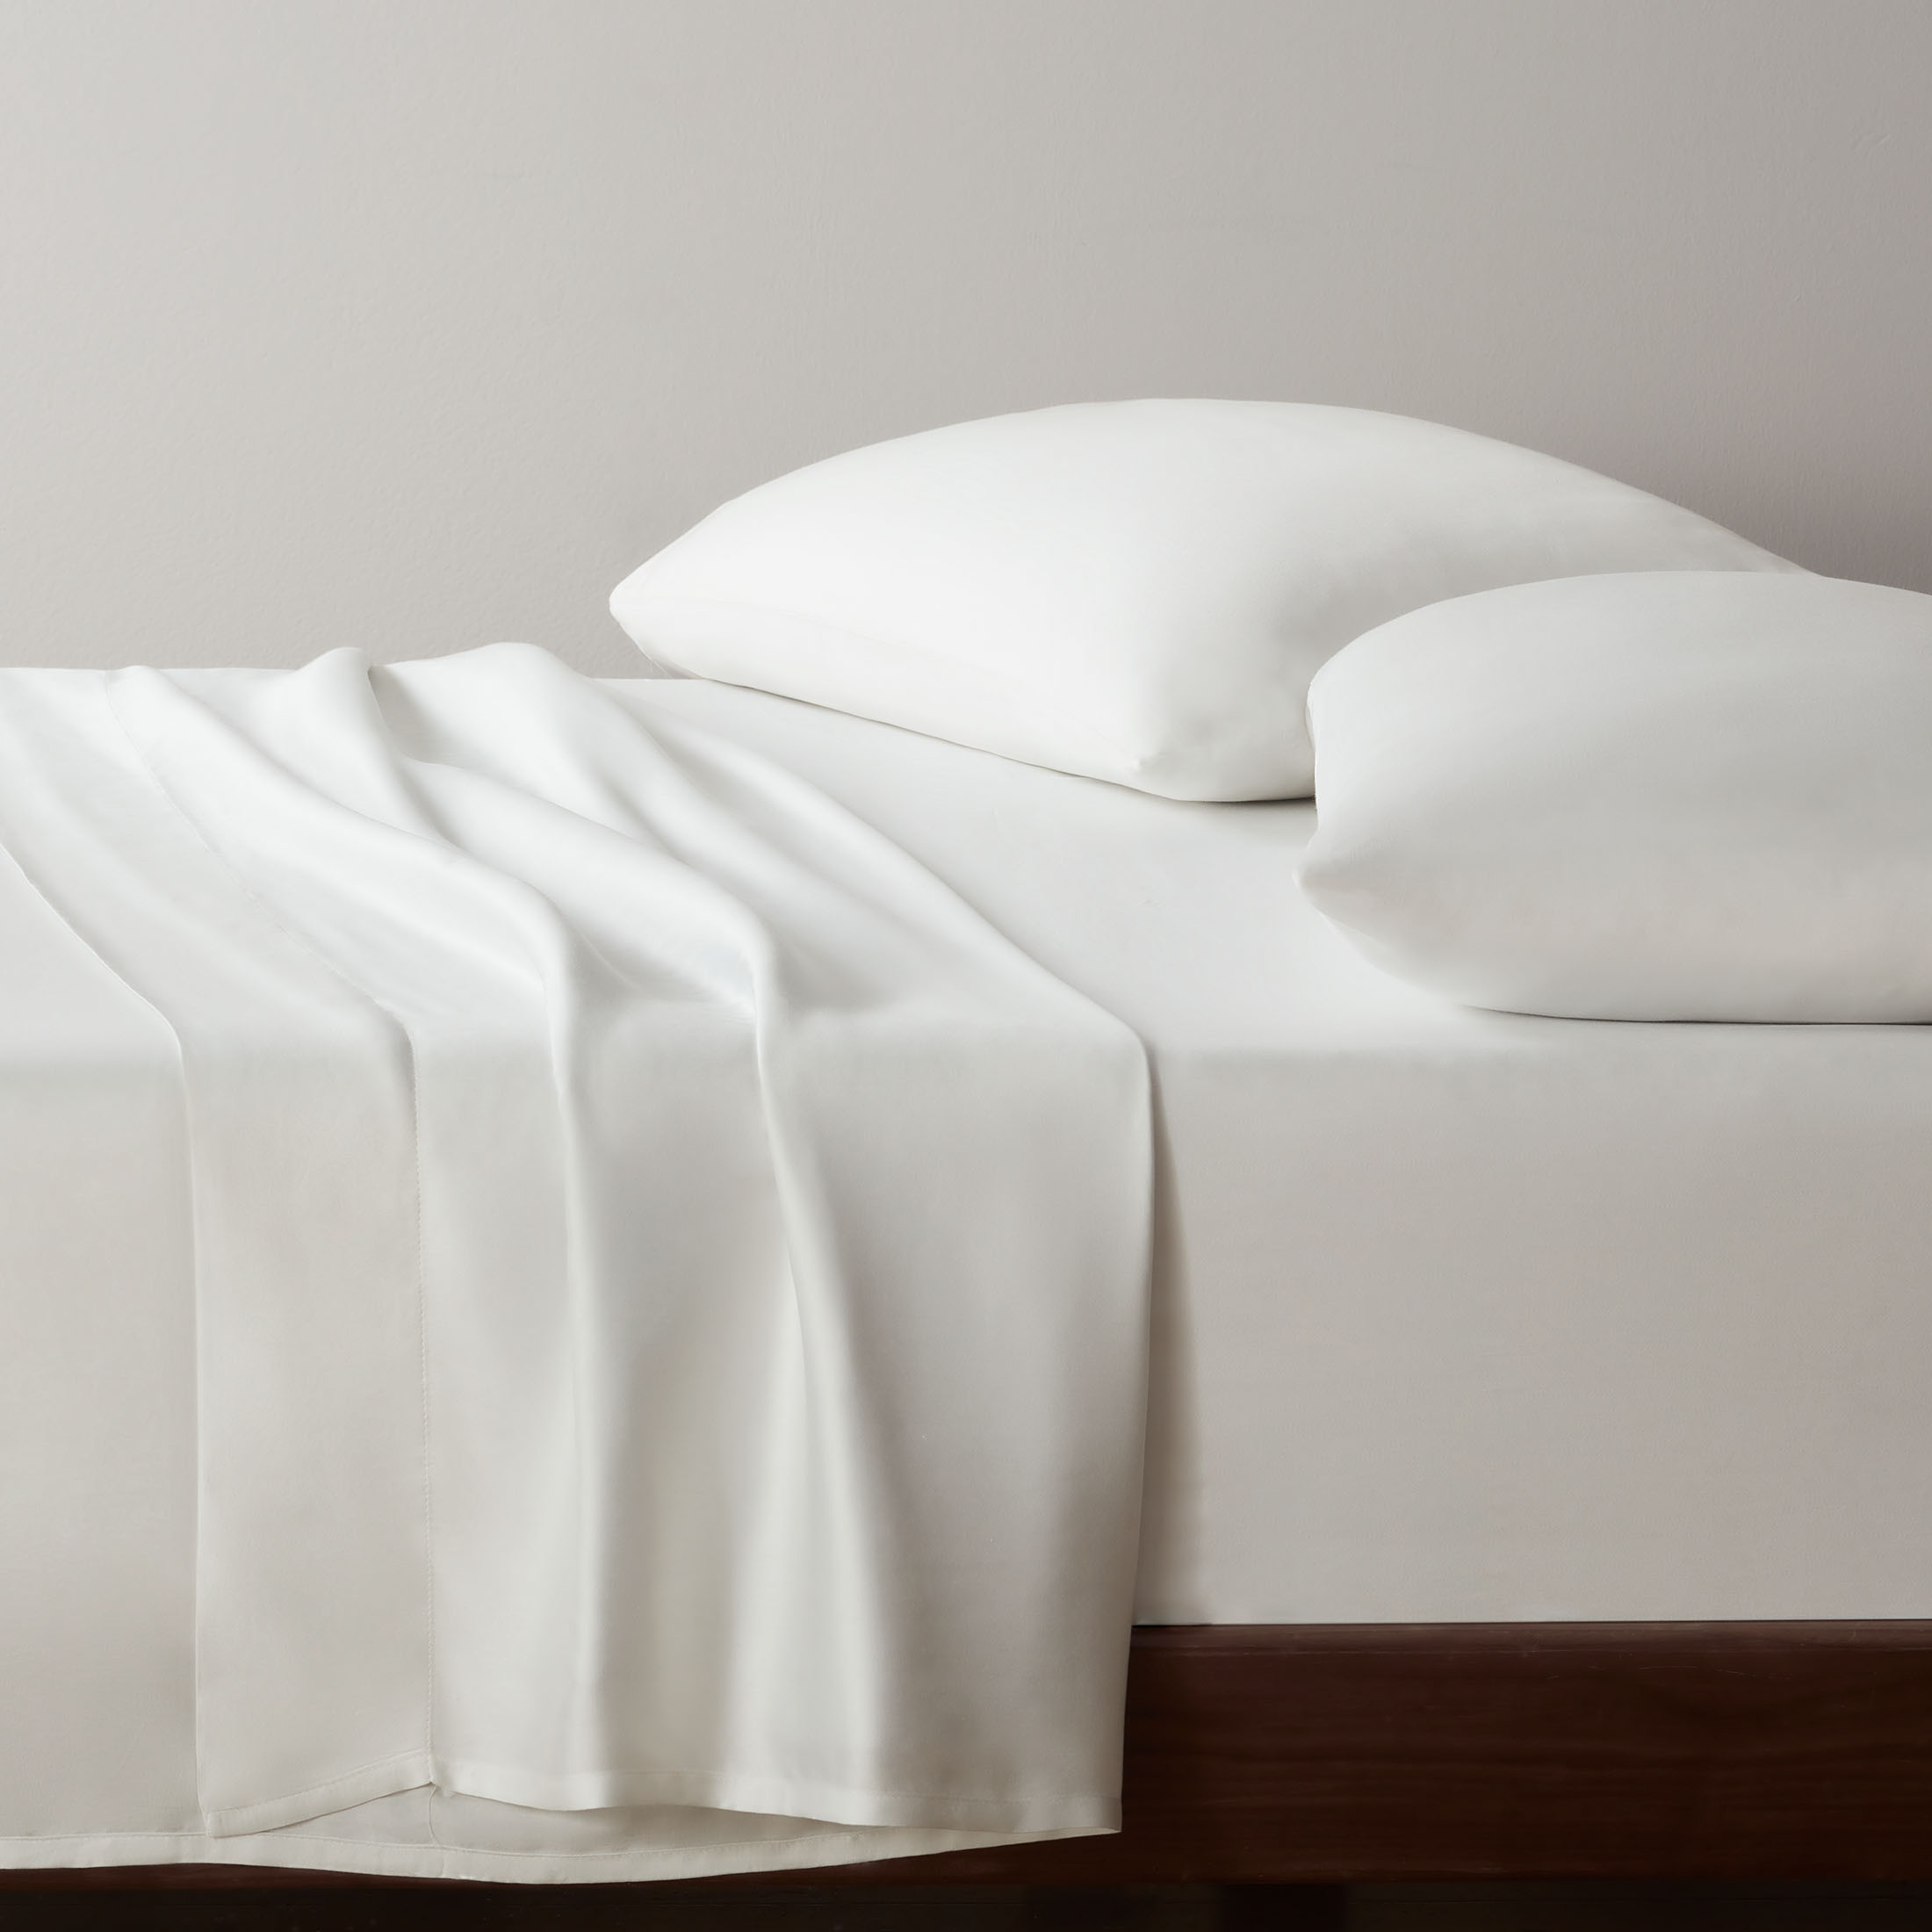 Allswell Soft & Silky 4-Piece Bleached Linen Viscose from Bamboo Sateen Bed Sheet Set, Queen - image 5 of 12